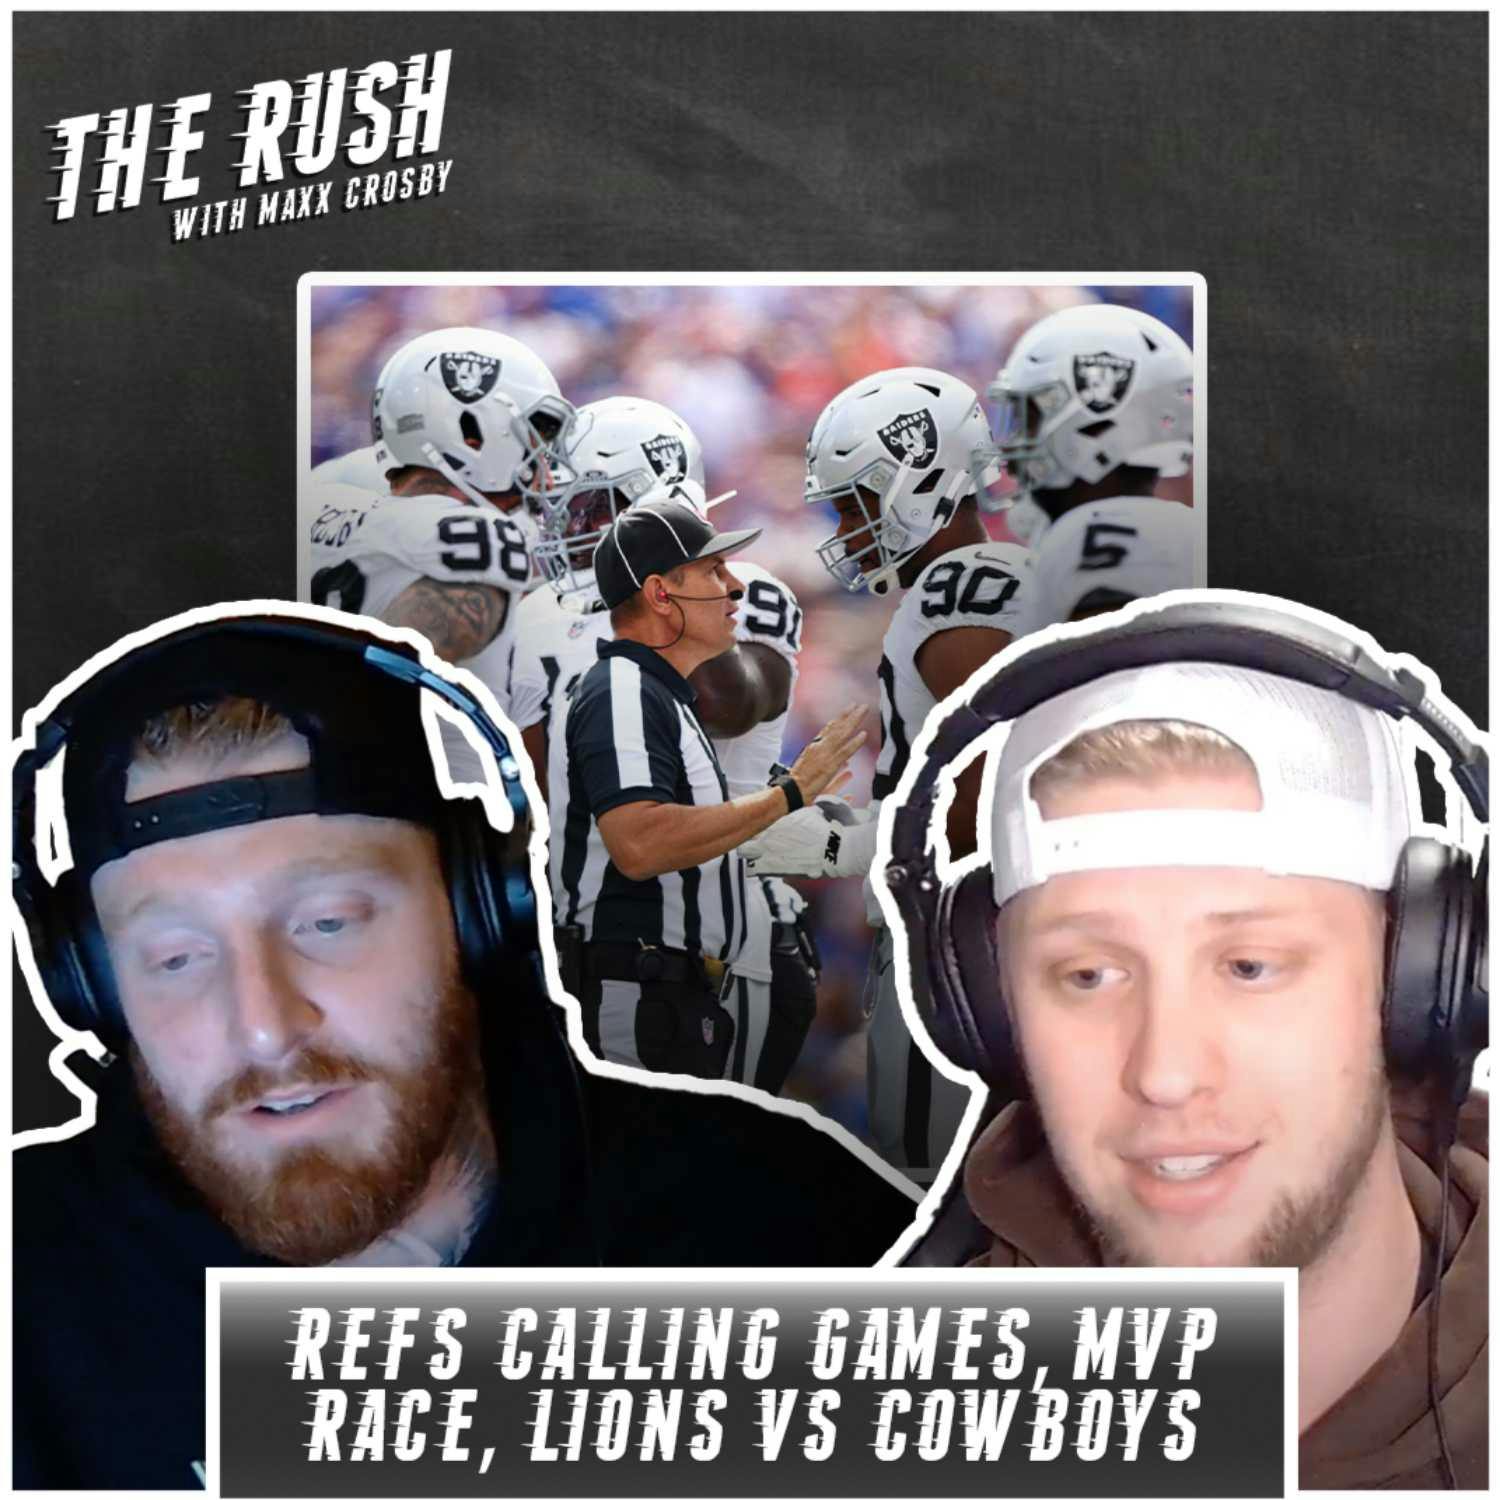 REFS CALLING GAMES? LIONS VS. COWBOYS CONTROVERSY!? LAMAR JACKSON MVP? NFL PLAYOFF PICTURE | The Rush | EP. 14